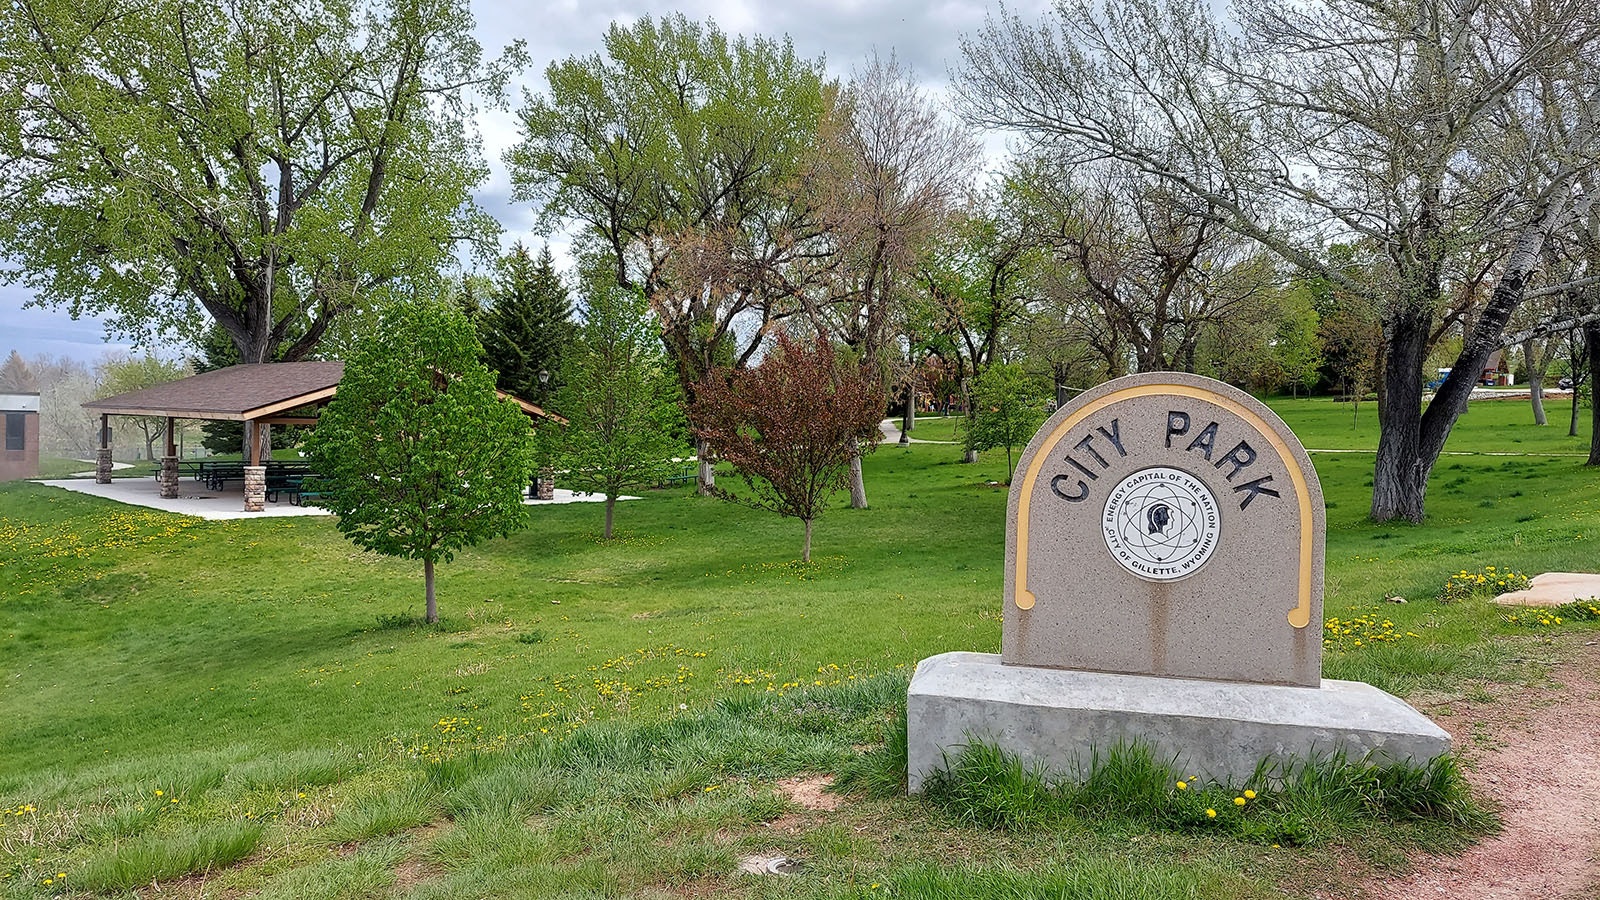 A local man is suing to display the atheist 21 Rules next to the 10 Commandments in Gillette City Park.